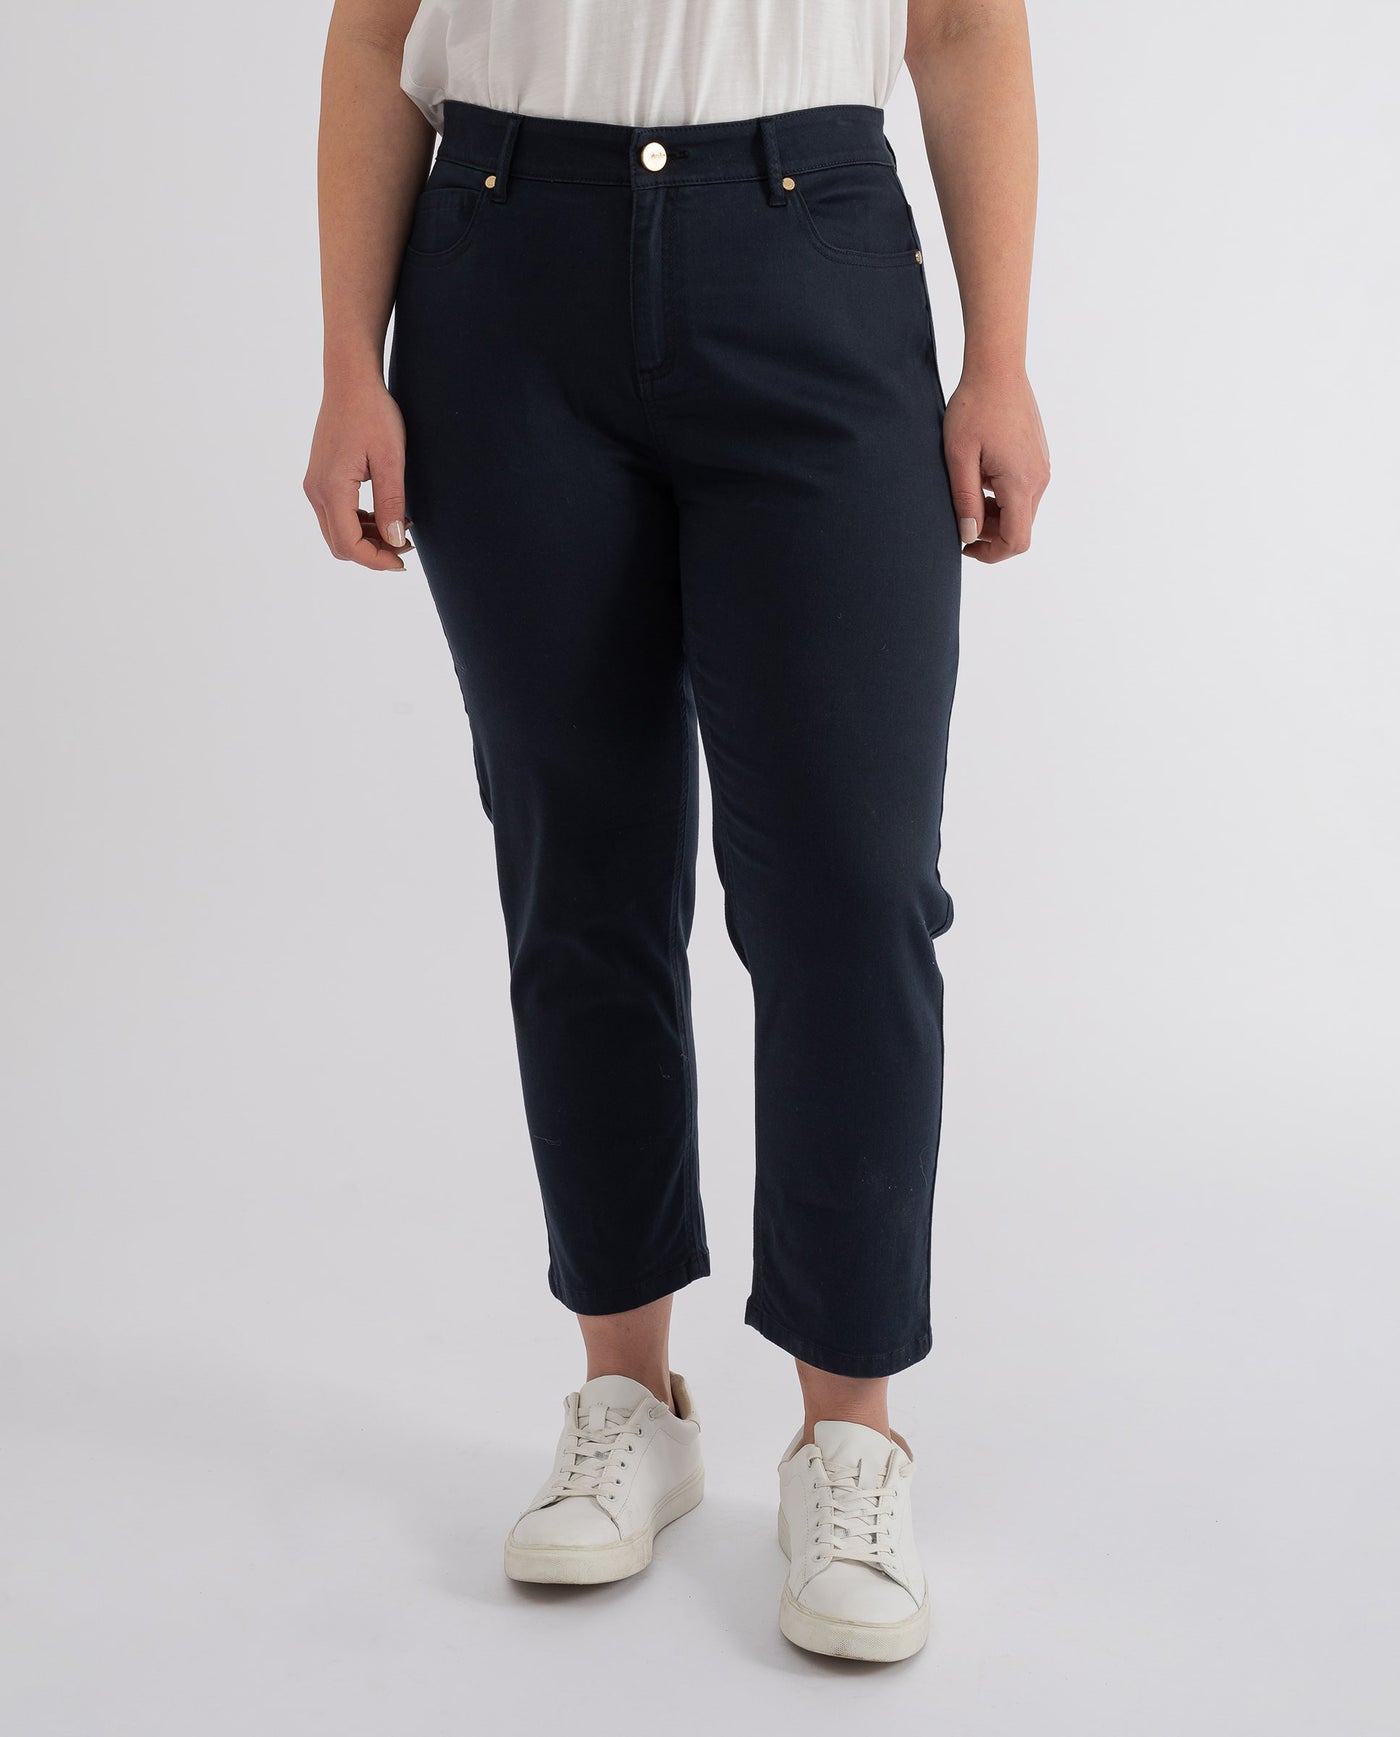 NAVY BLUE 5 POCKET TROUSERS